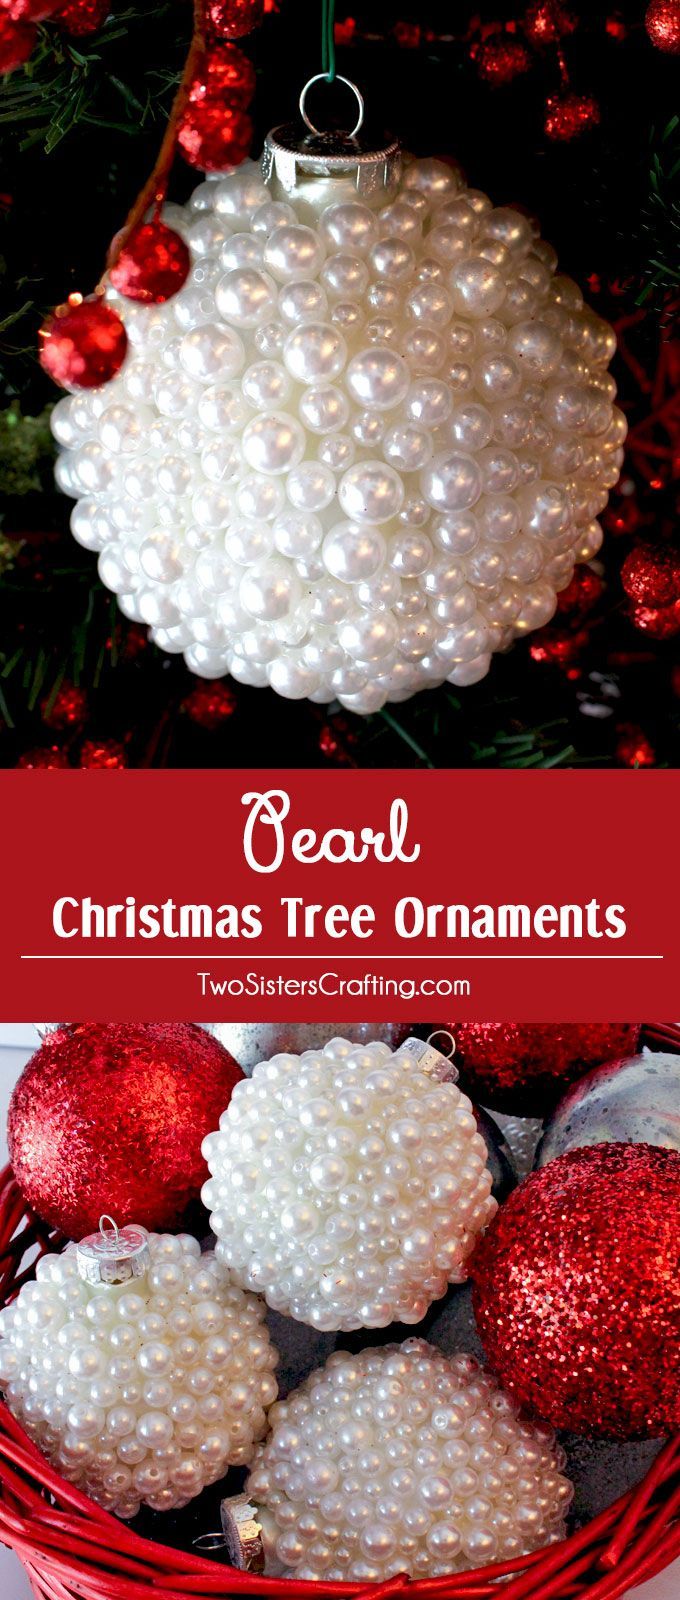 These Pearl Christmas Tree Ornaments are a fun craft that results in beautifully u